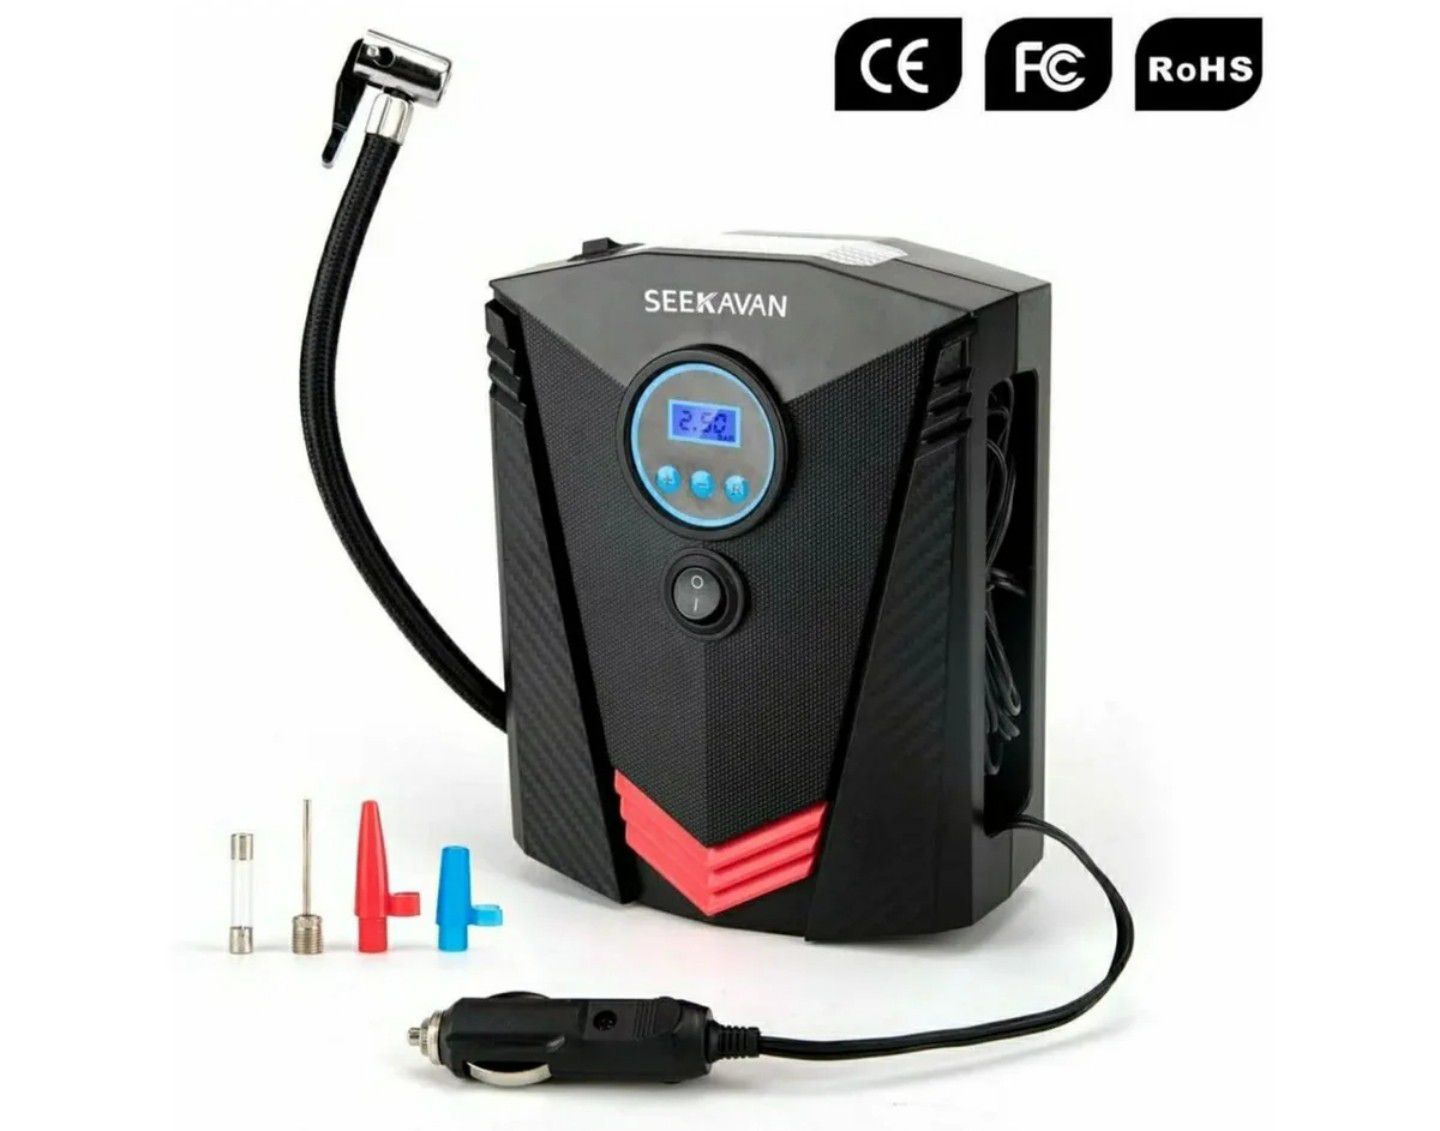 Tire Inflator, Portable Air Compressor Pump 12V DC with Digital LCD up to 150PSI for Car, Motorcycle, Bicycle and Other Inflatables.